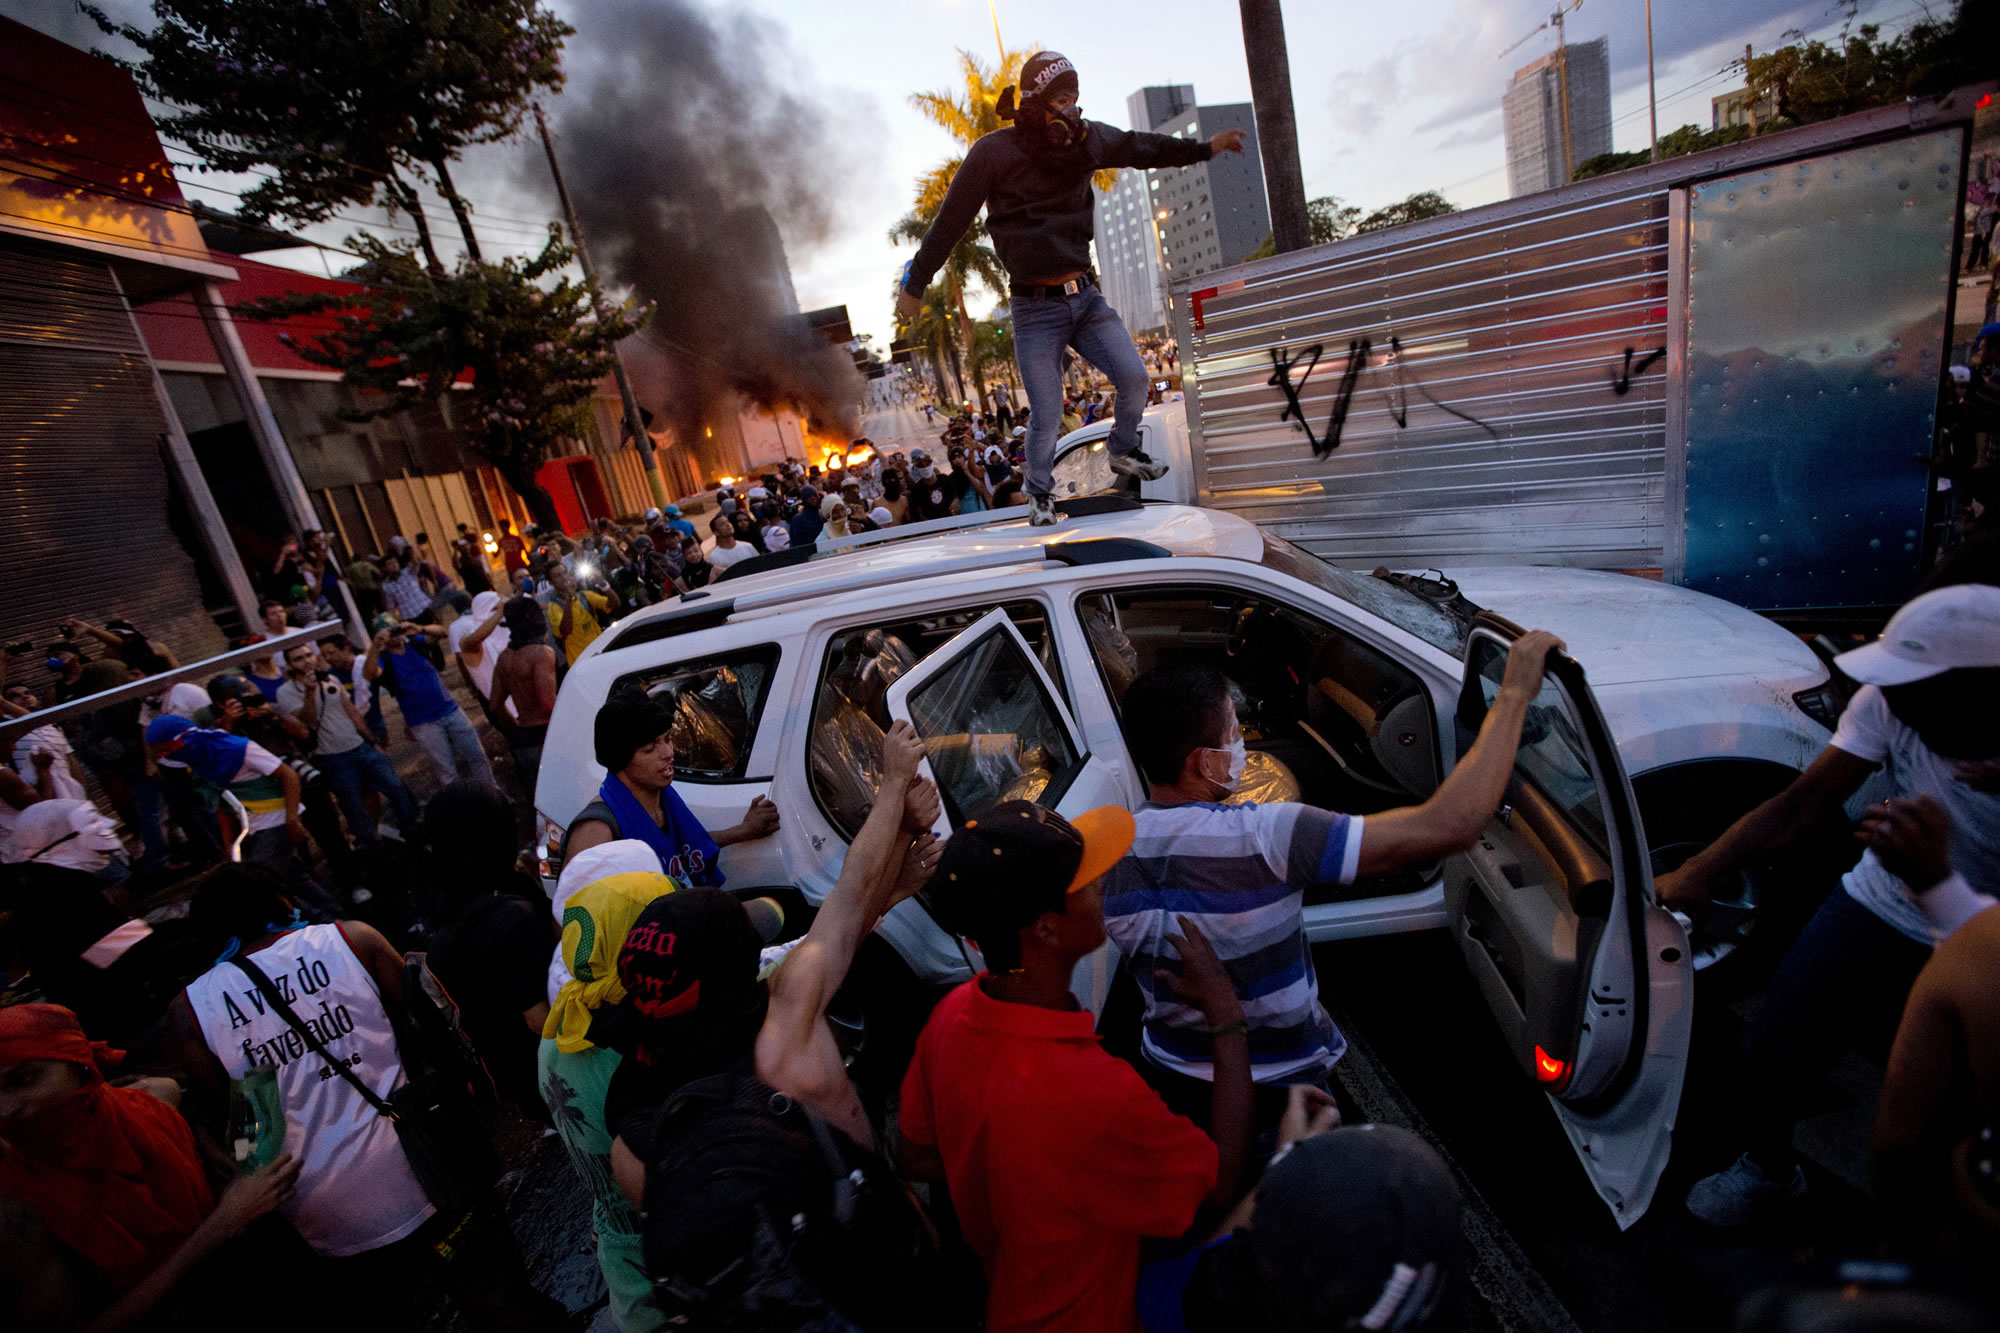 Protesters destroy a car from a car dealership June 26 during a demonstration in Belo Horizonte, Brazil.